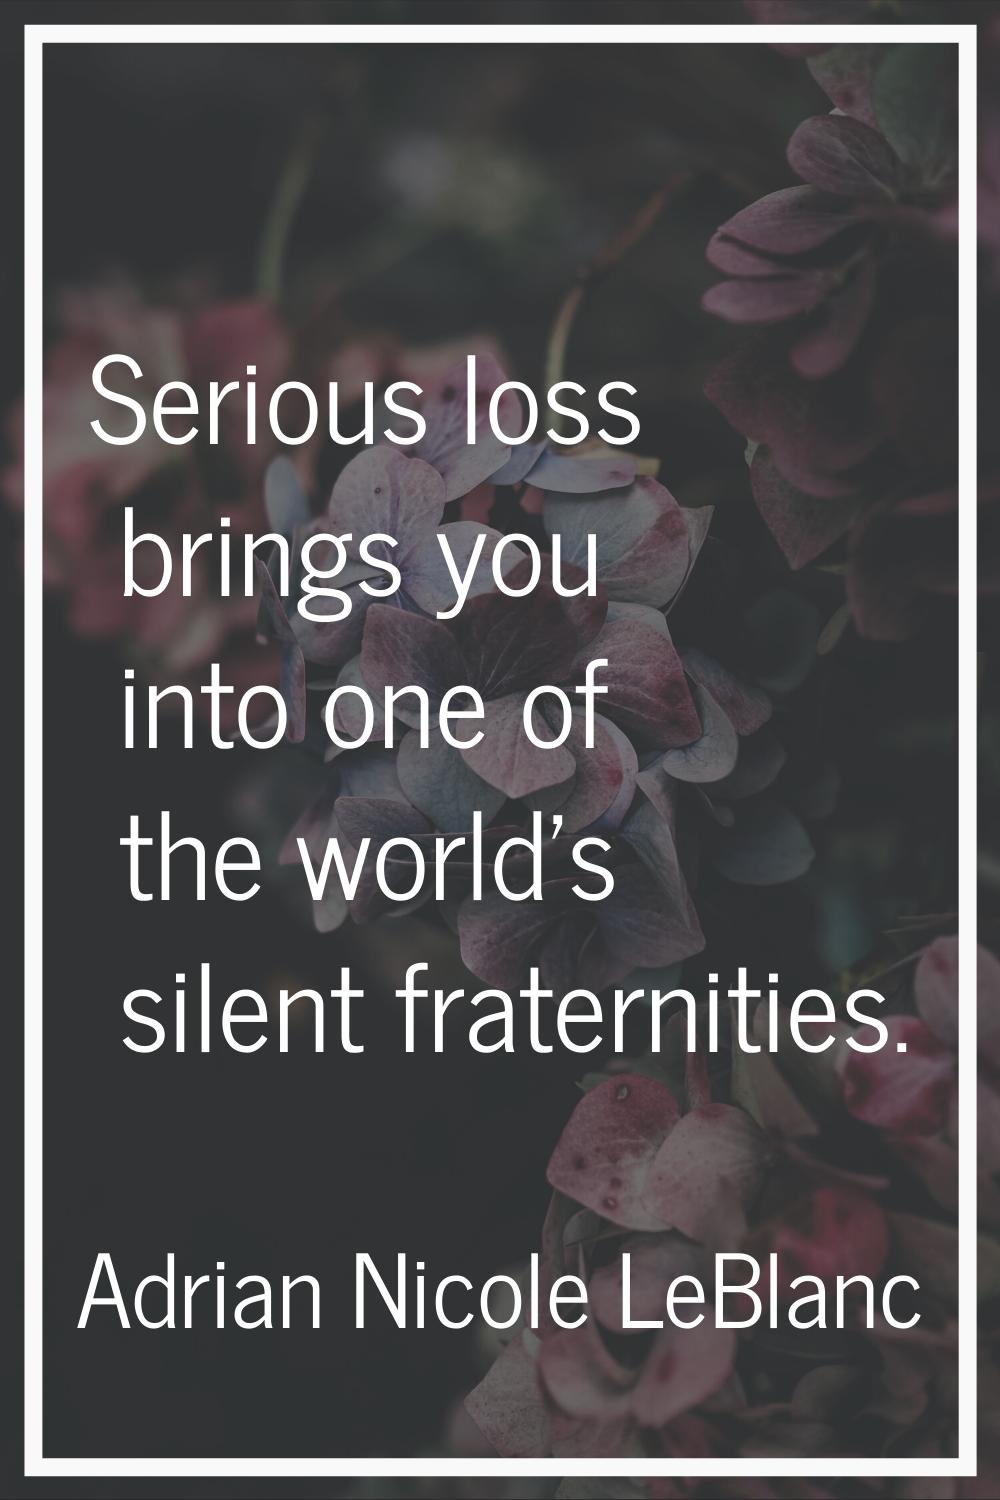 Serious loss brings you into one of the world's silent fraternities.